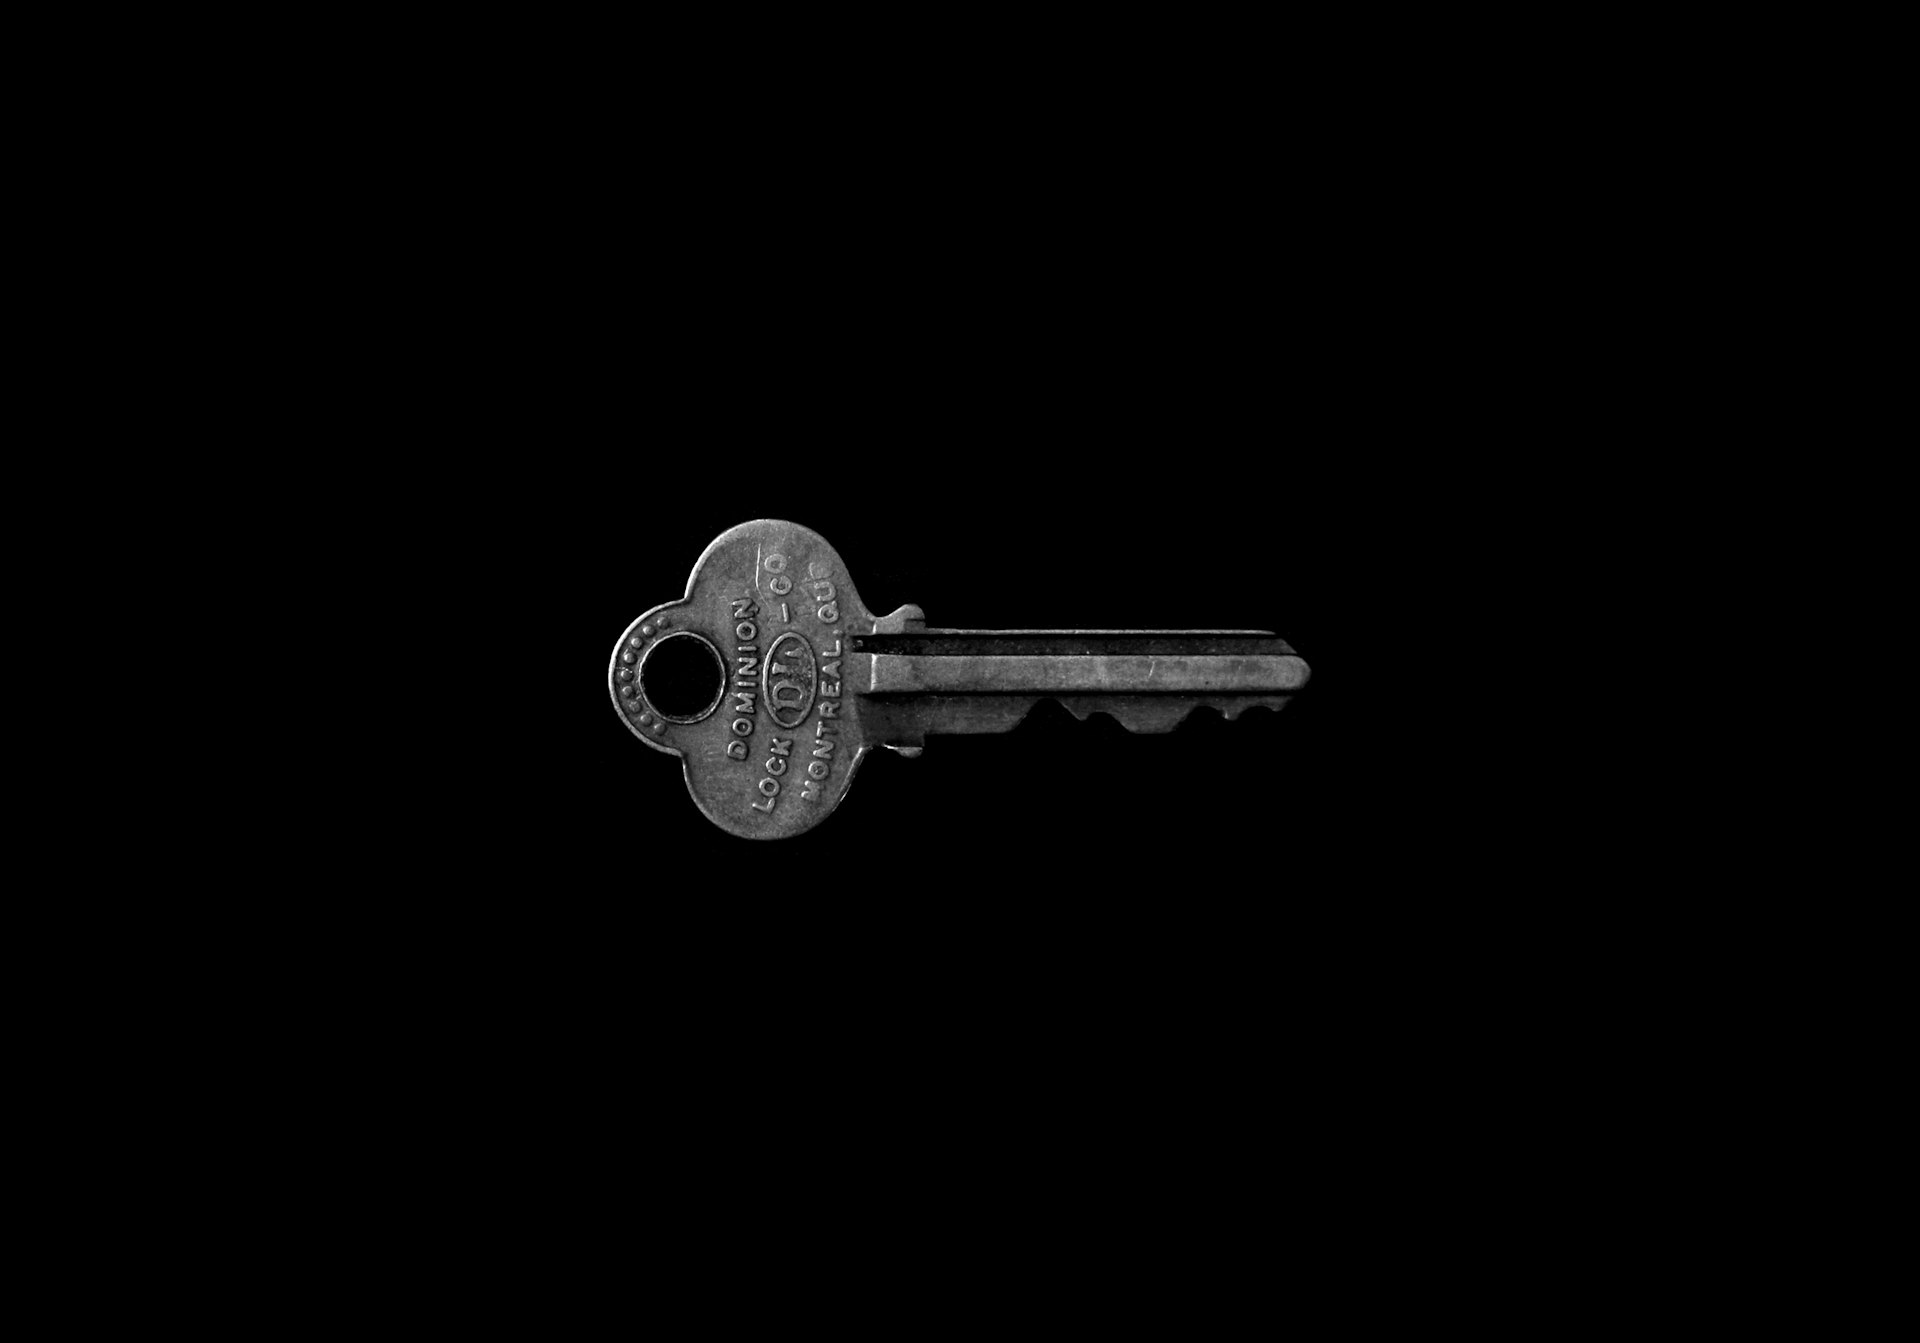 A Shallow Dive into Private-Key Encryptions